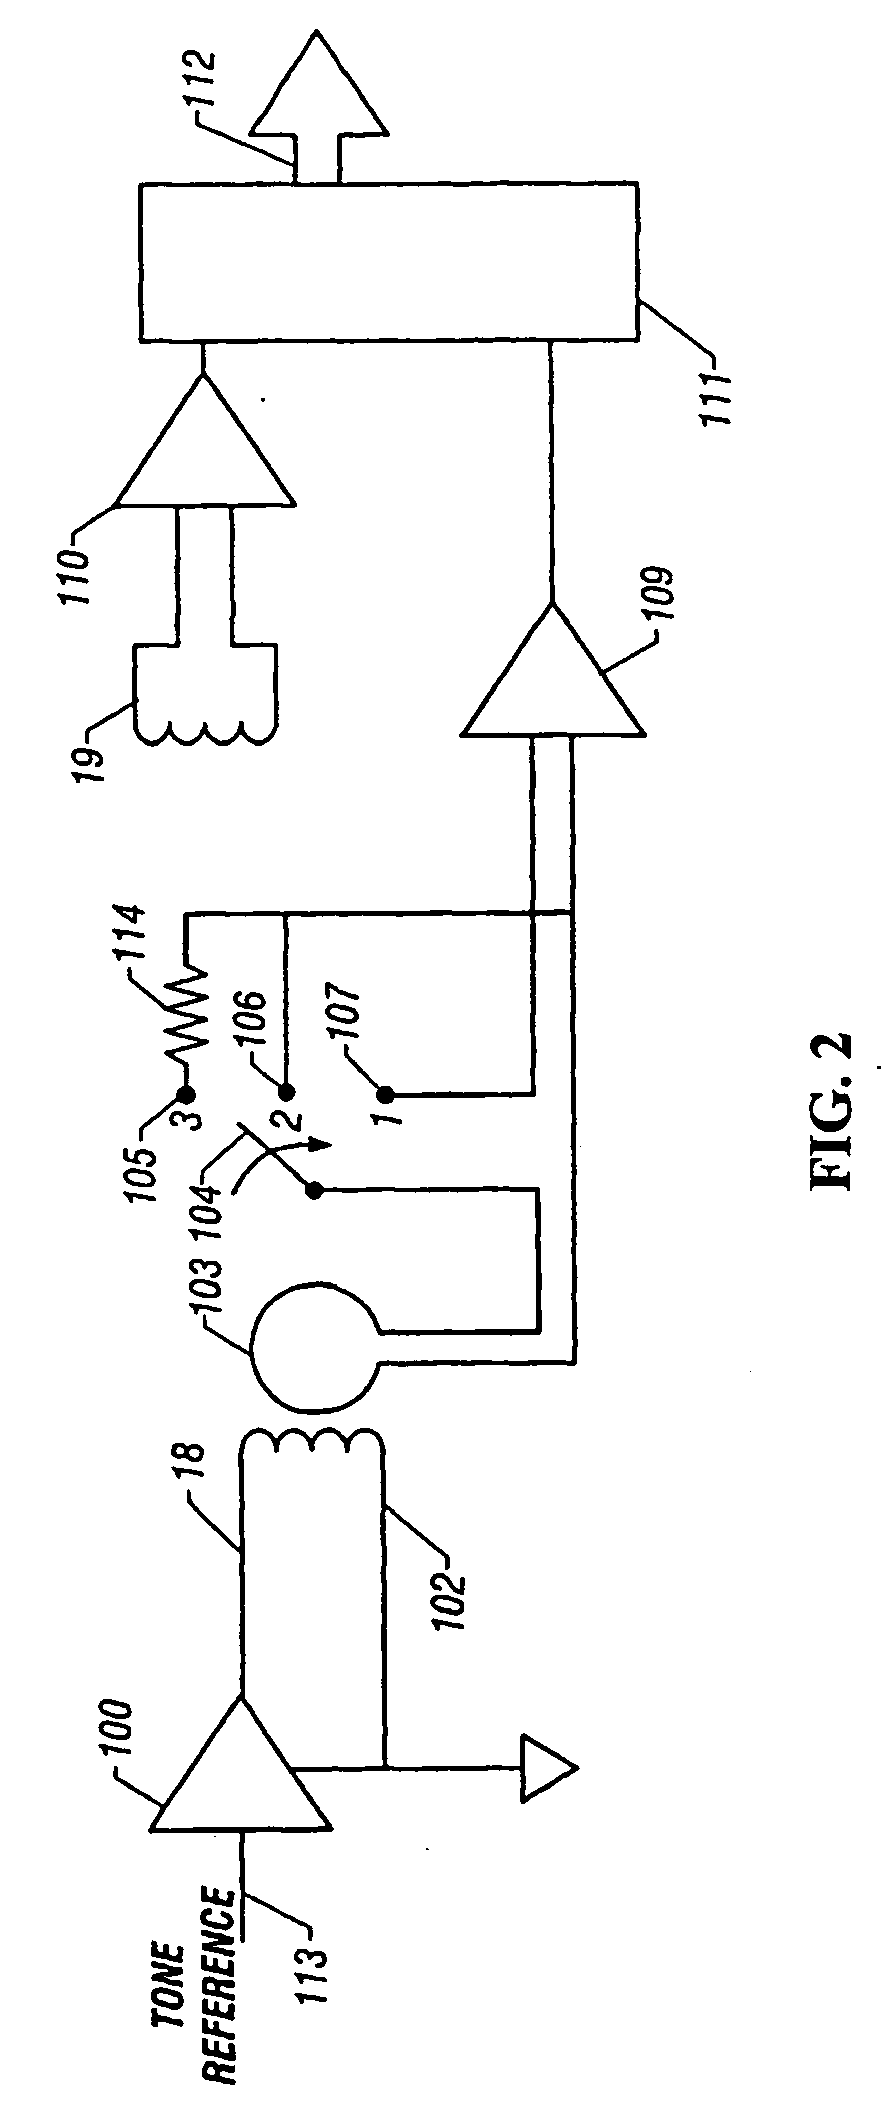 Method and apparatus for internal calibration in induction logging instruments